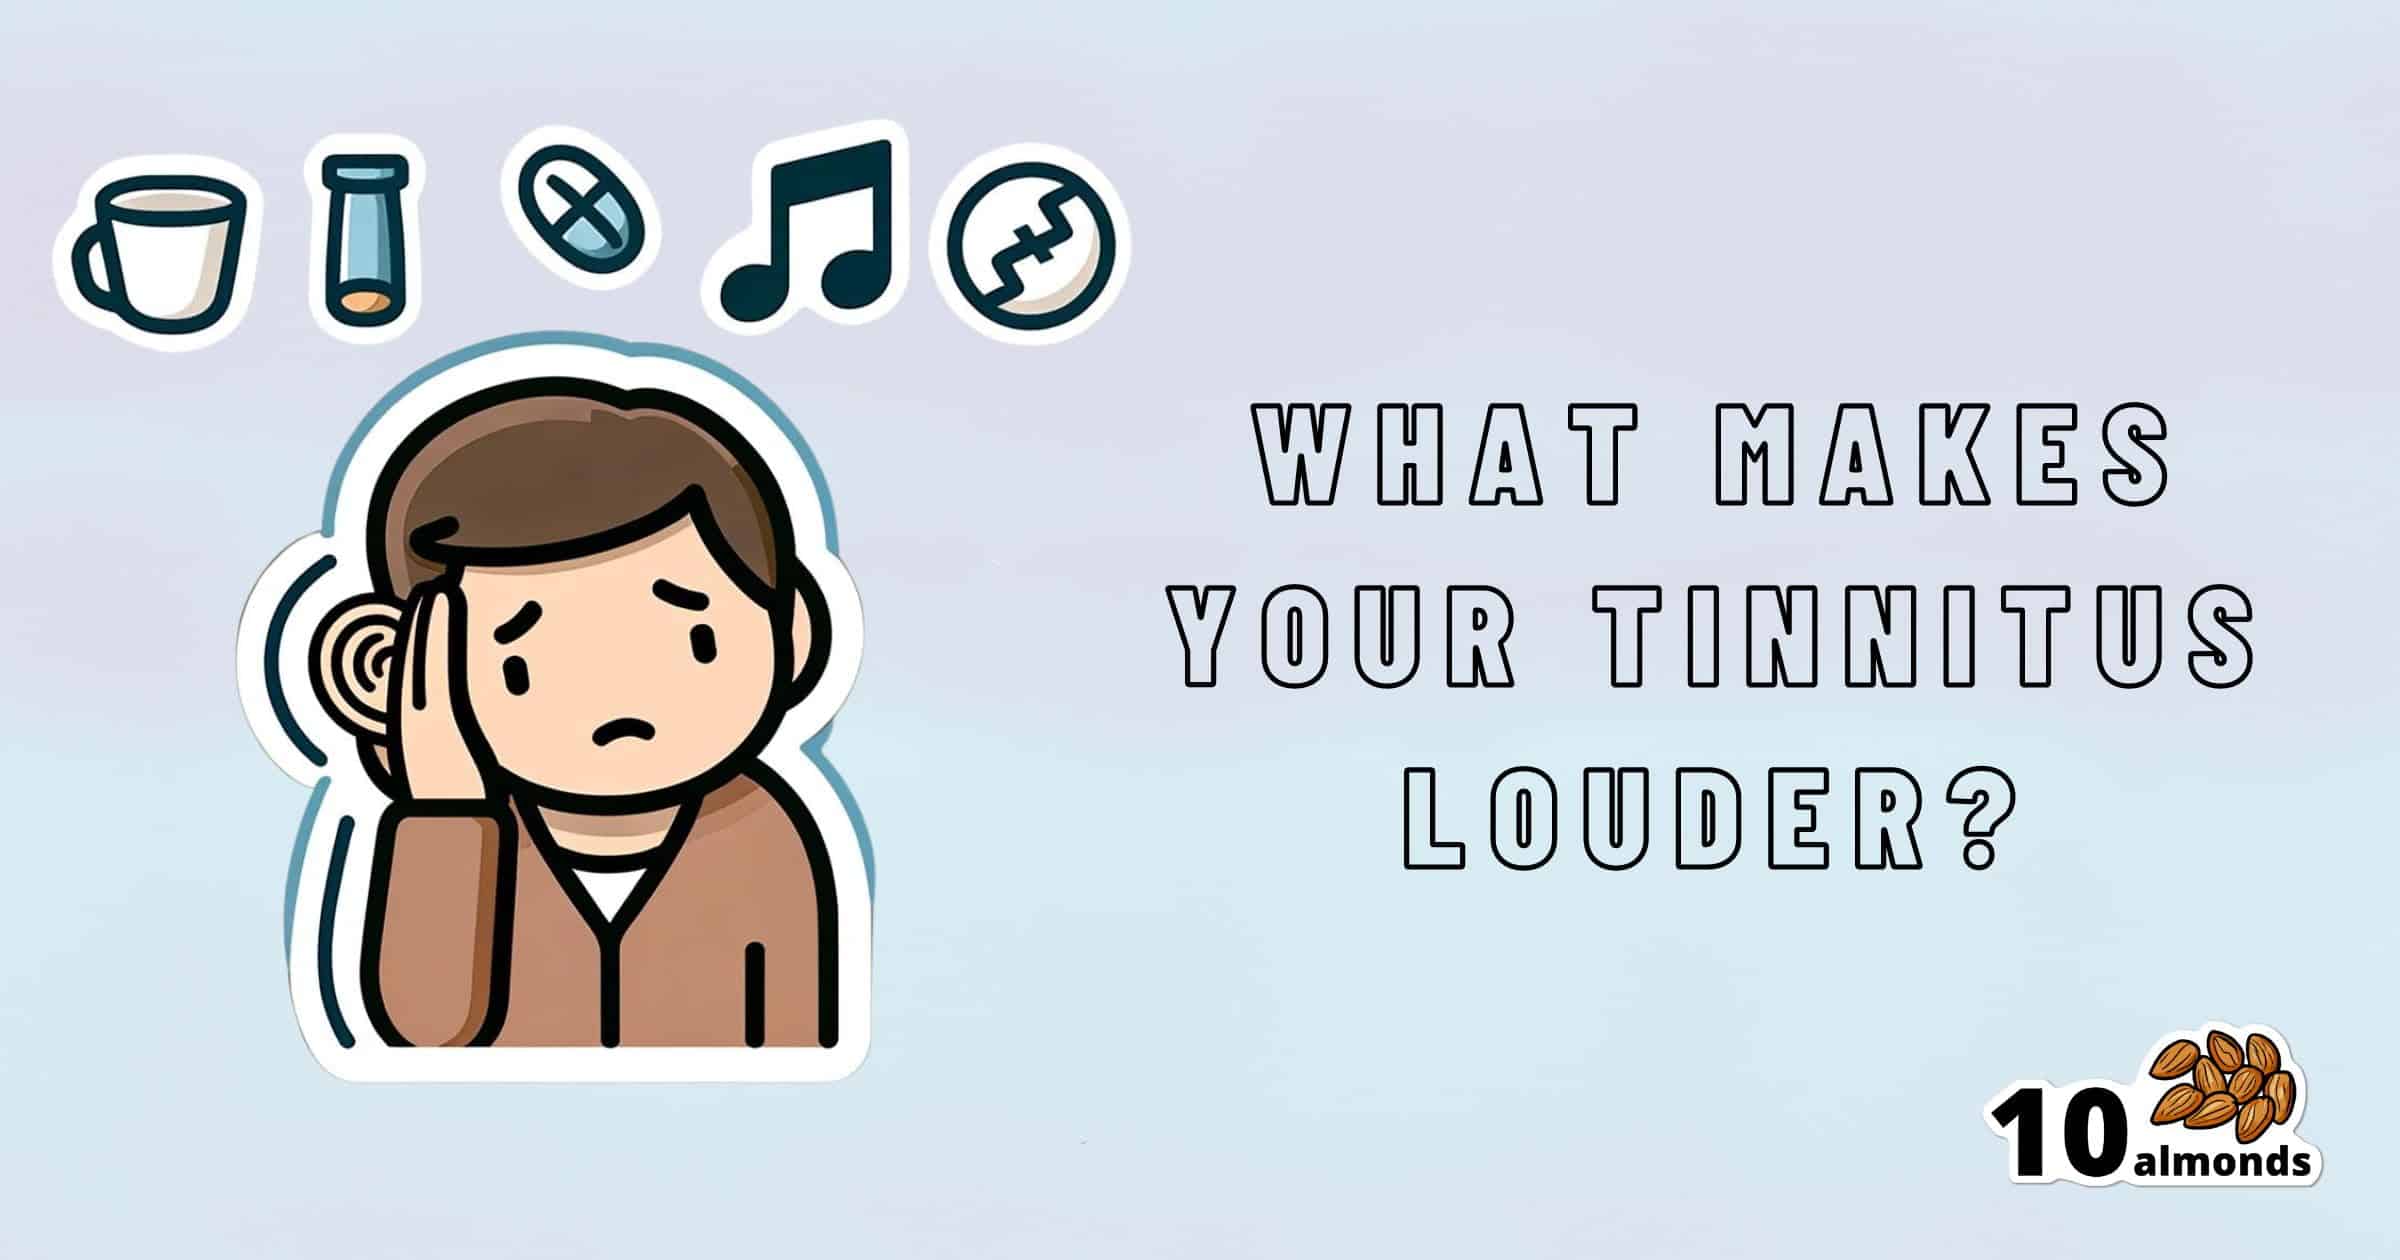 A graphic with the text "What makes your tinnitus louder?" features an illustration of a person holding their hand to their ear, with icons above depicting a cup of coffee, a pill, a musical note, a crossed-out symbol, and a circular arrow—highlighting common tinnitus causes.